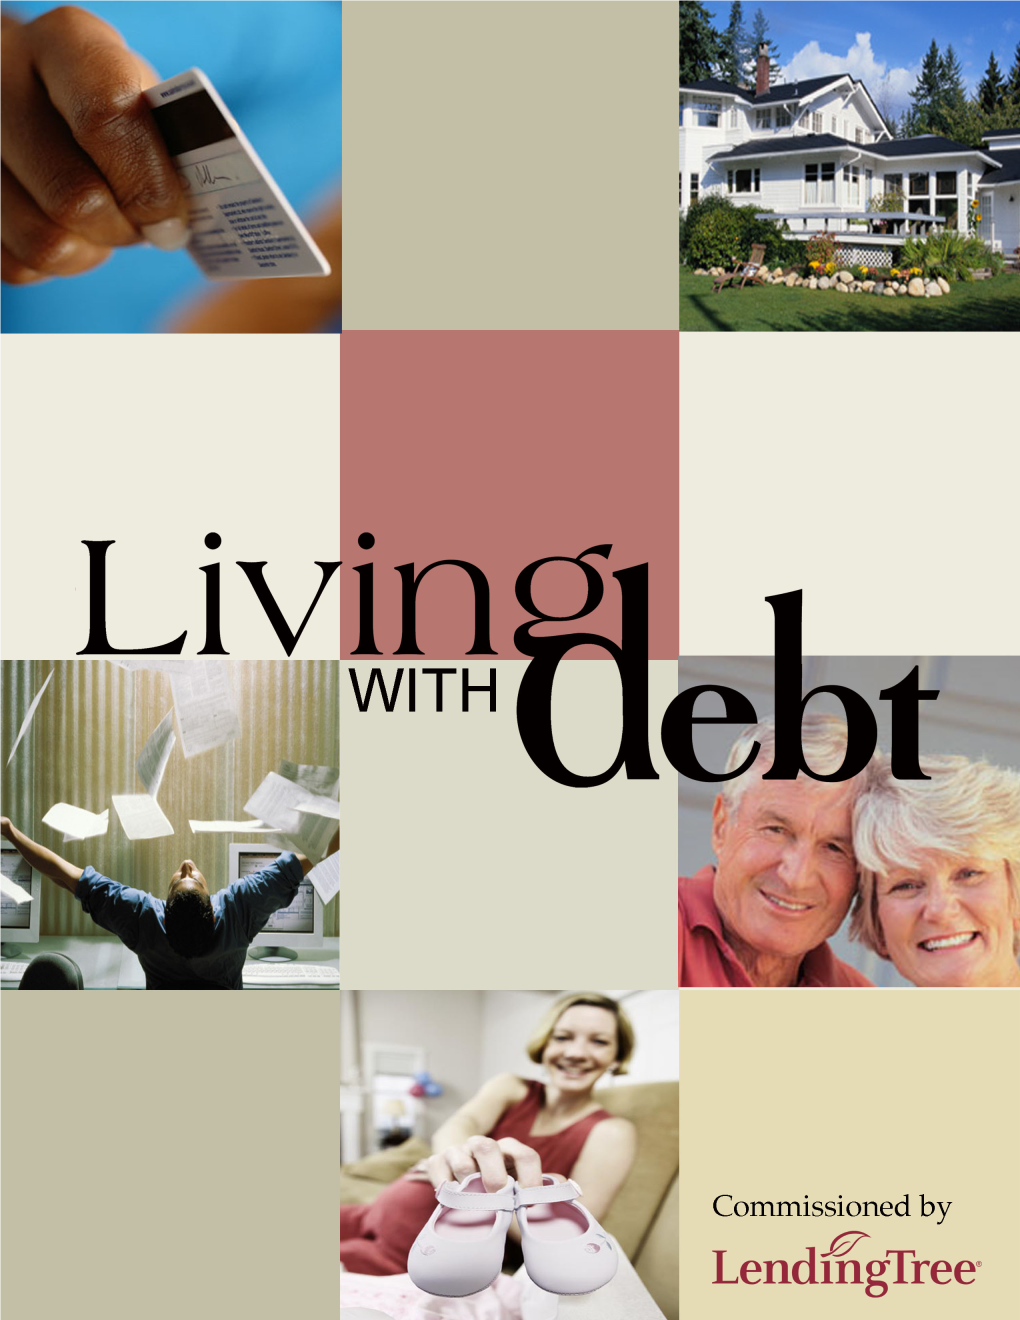 LIVING with DEBT: a Life Stage Analysis of Changing Attitudes and Behaviors Author: Robert D